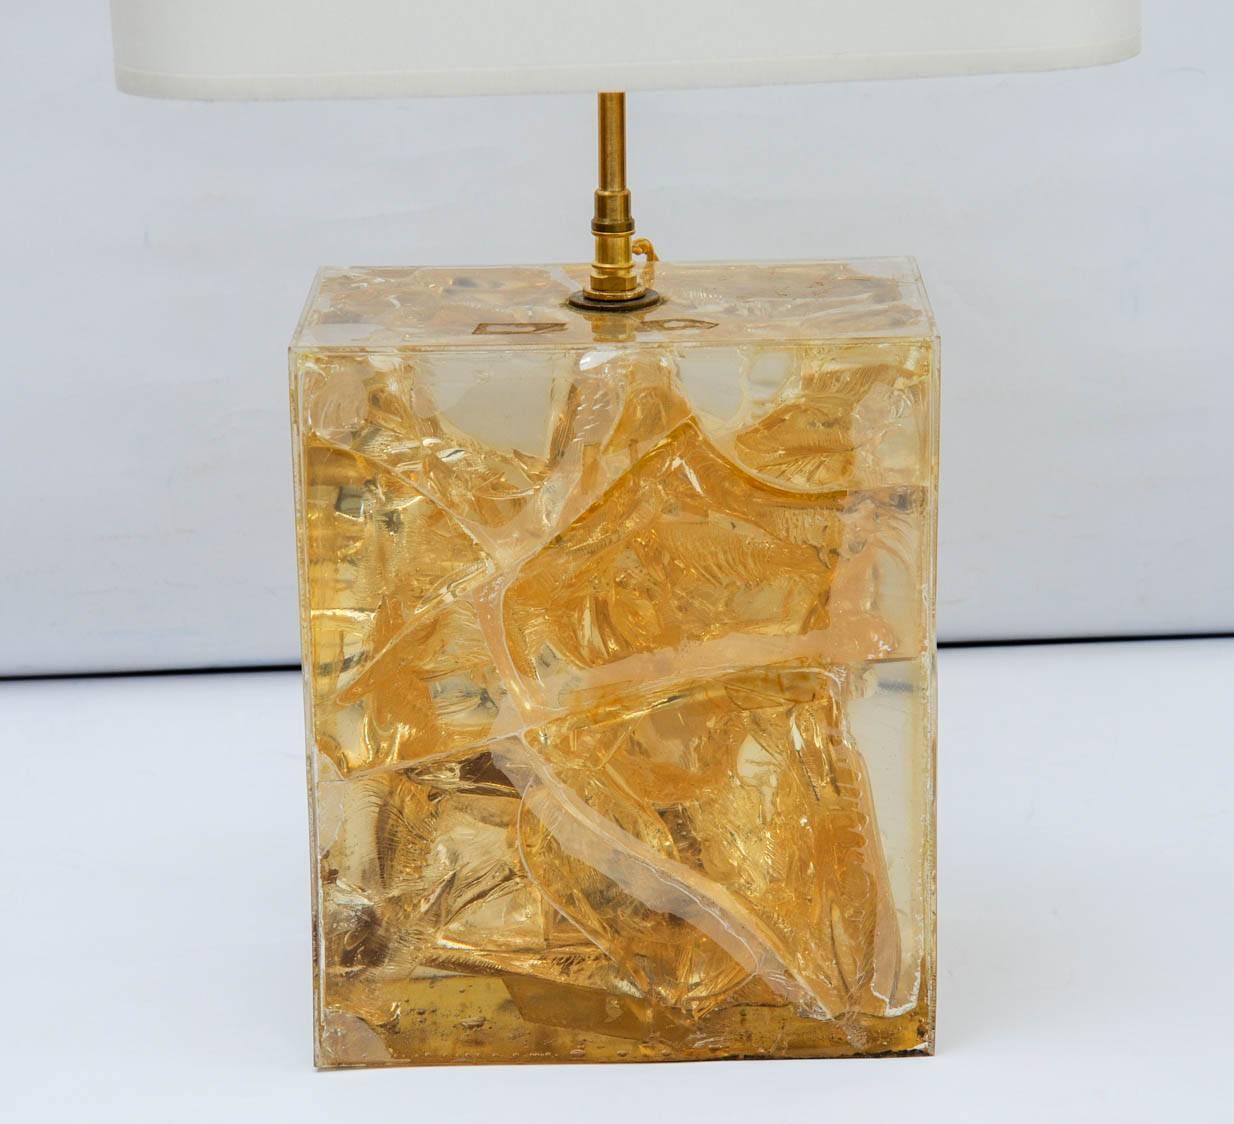 Brick shaped table lamp made of a resin fractal block in faded yellow colour and new brass neck.
   